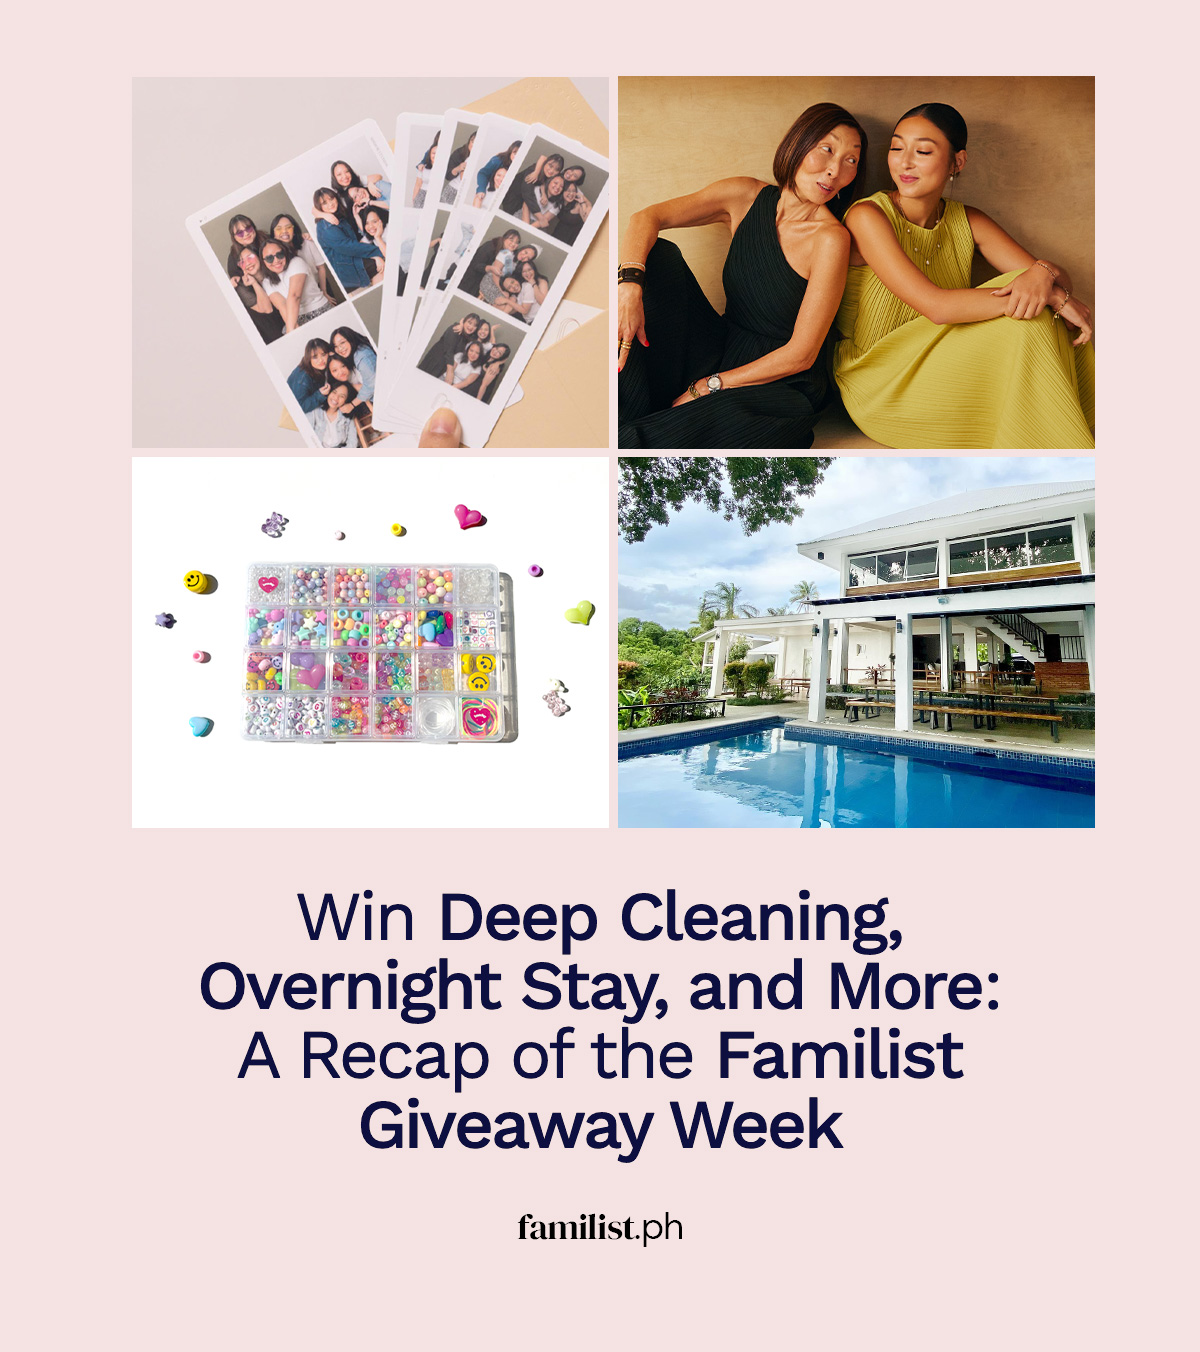 Win Deep Cleaning, Overnight Stay, and More: A Recap of the Familist Giveaway Week